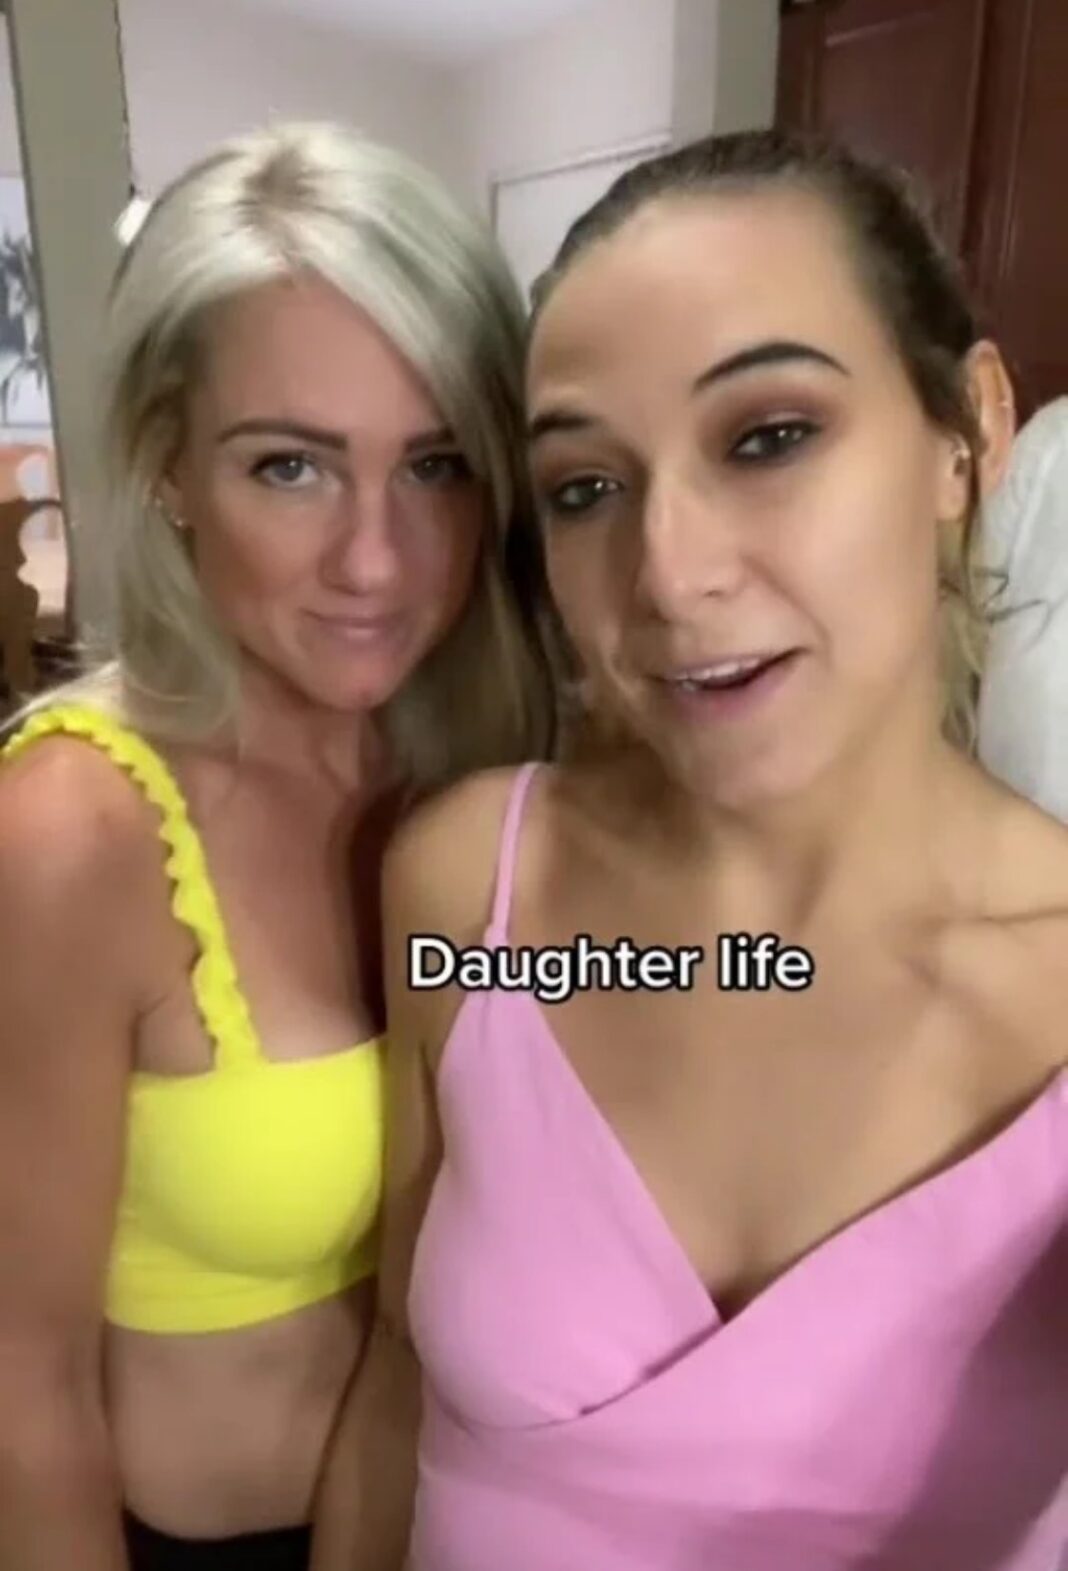 Family of swingers: Woman shares her husband with mum and kid sister |  Fedreds News Report